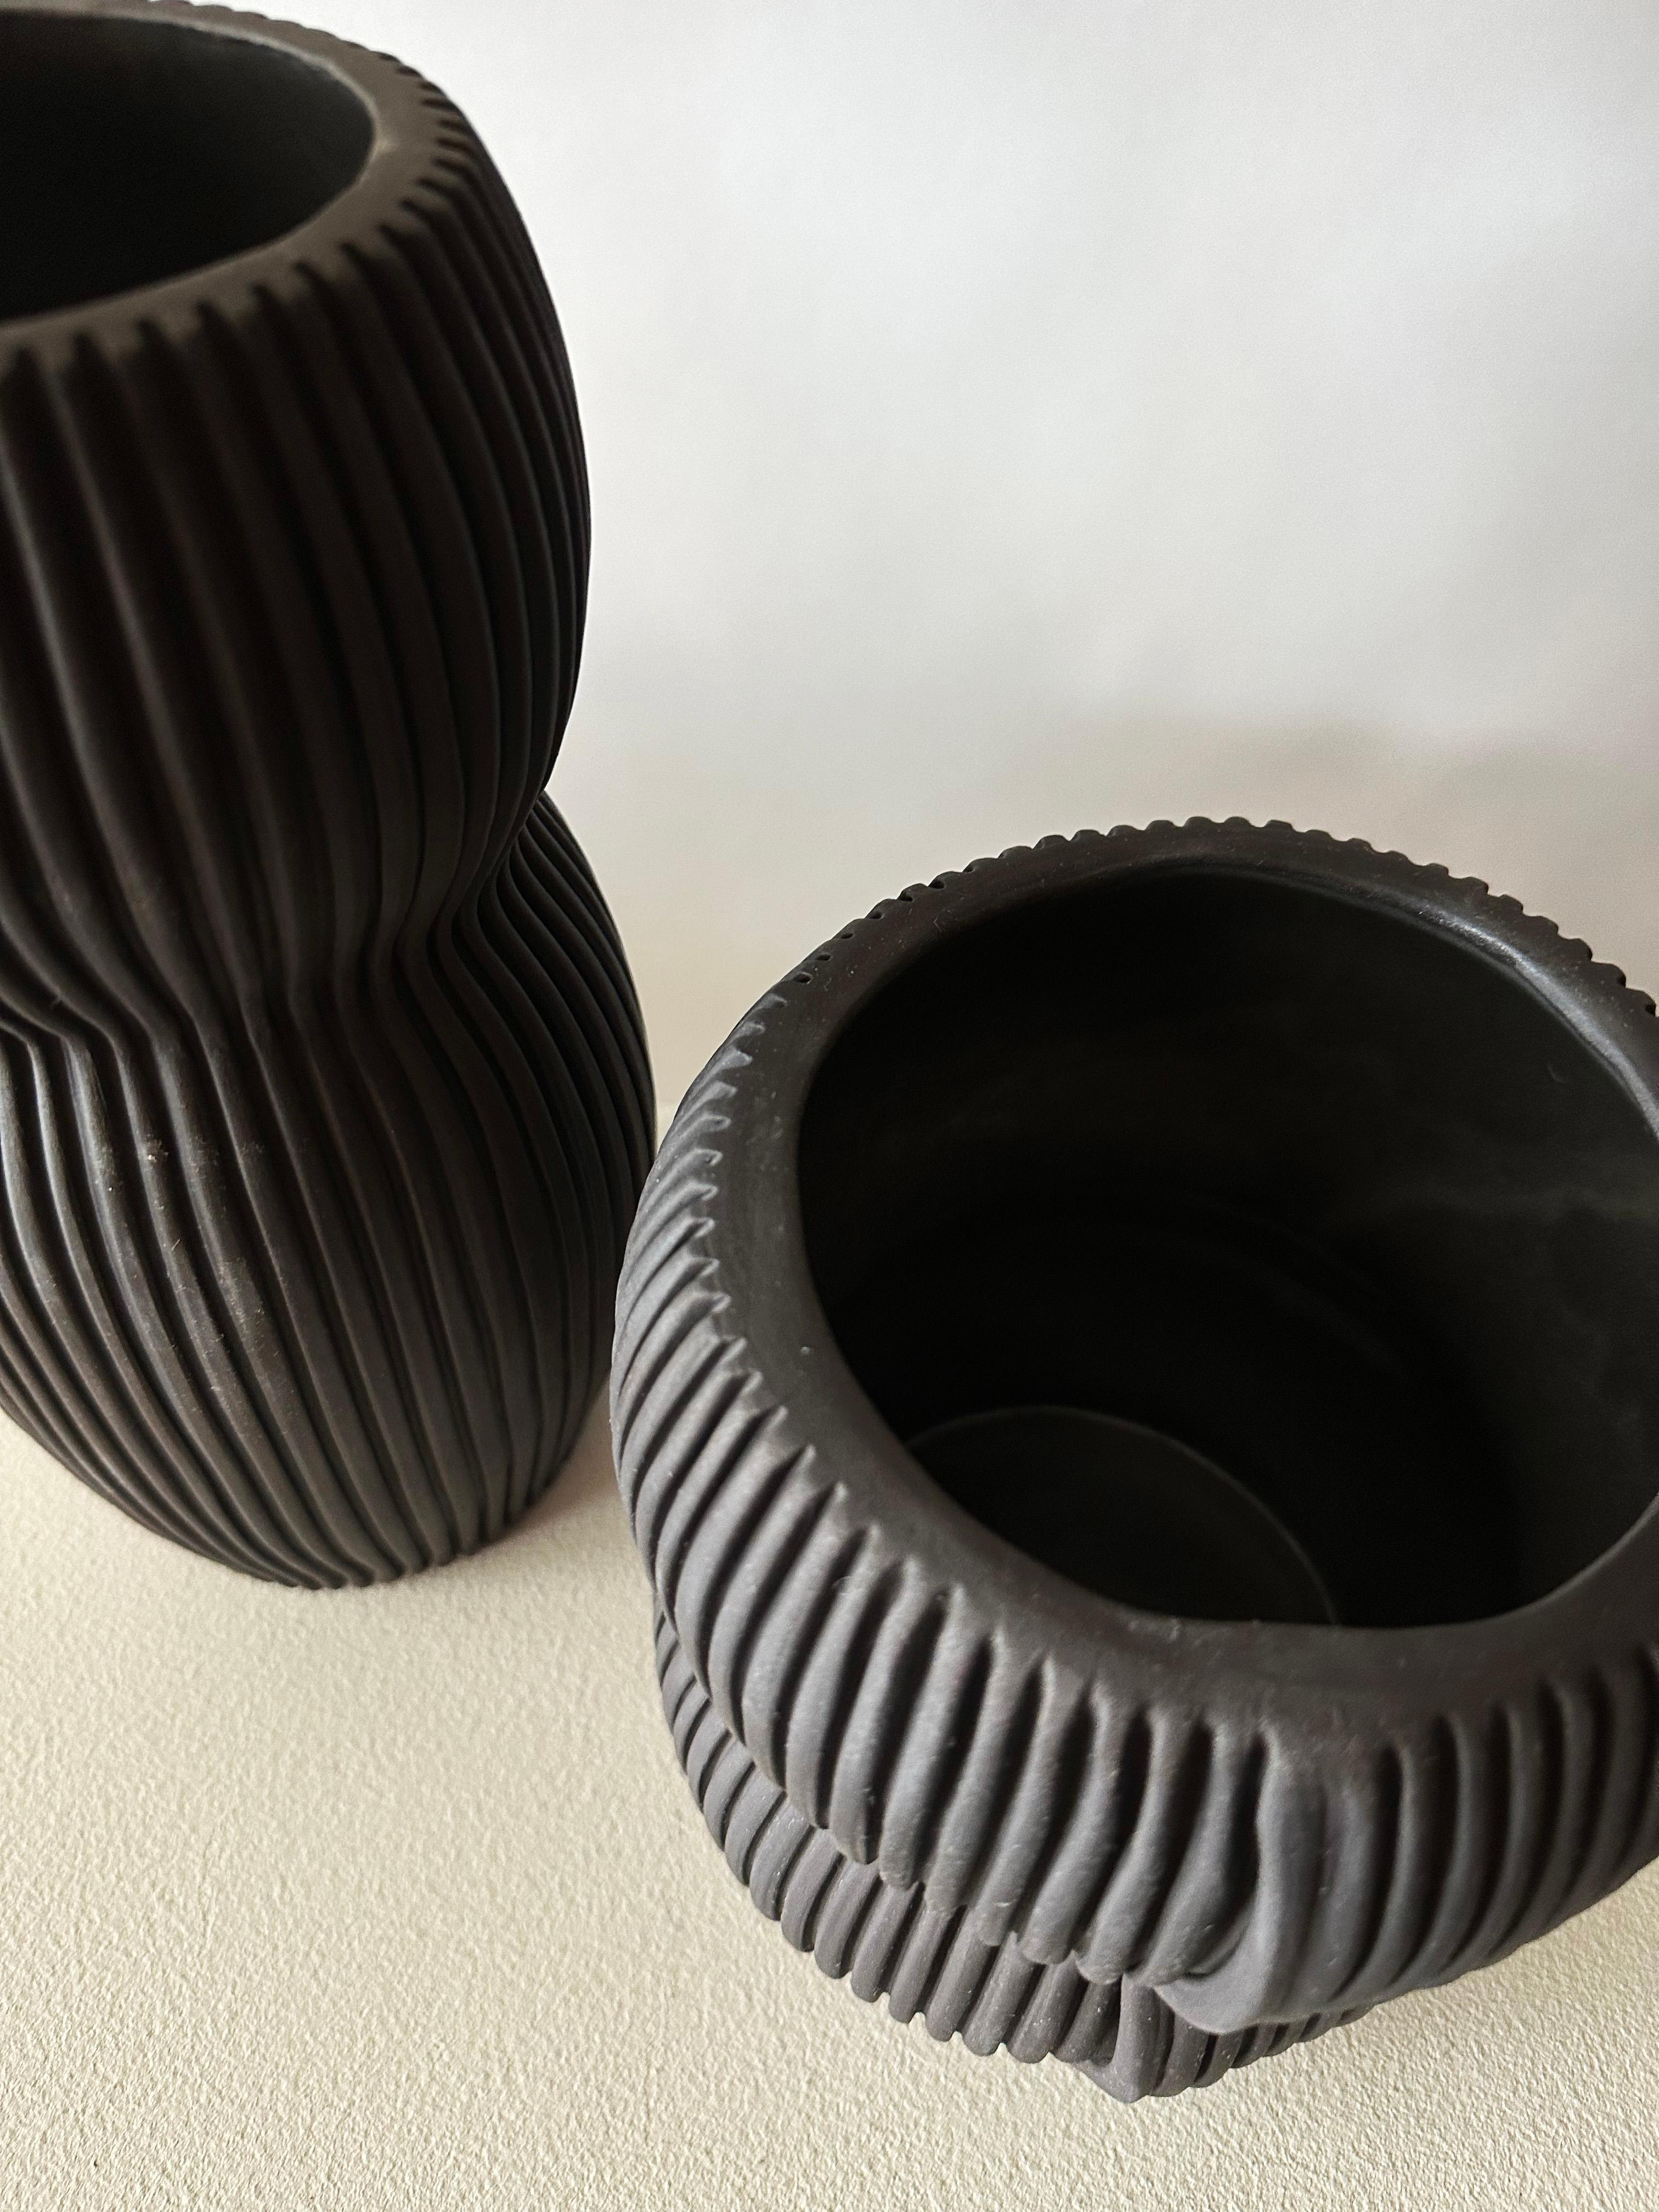 American Pair of Curvy Textured Black Porcelain Vases by Cym Warkov For Sale